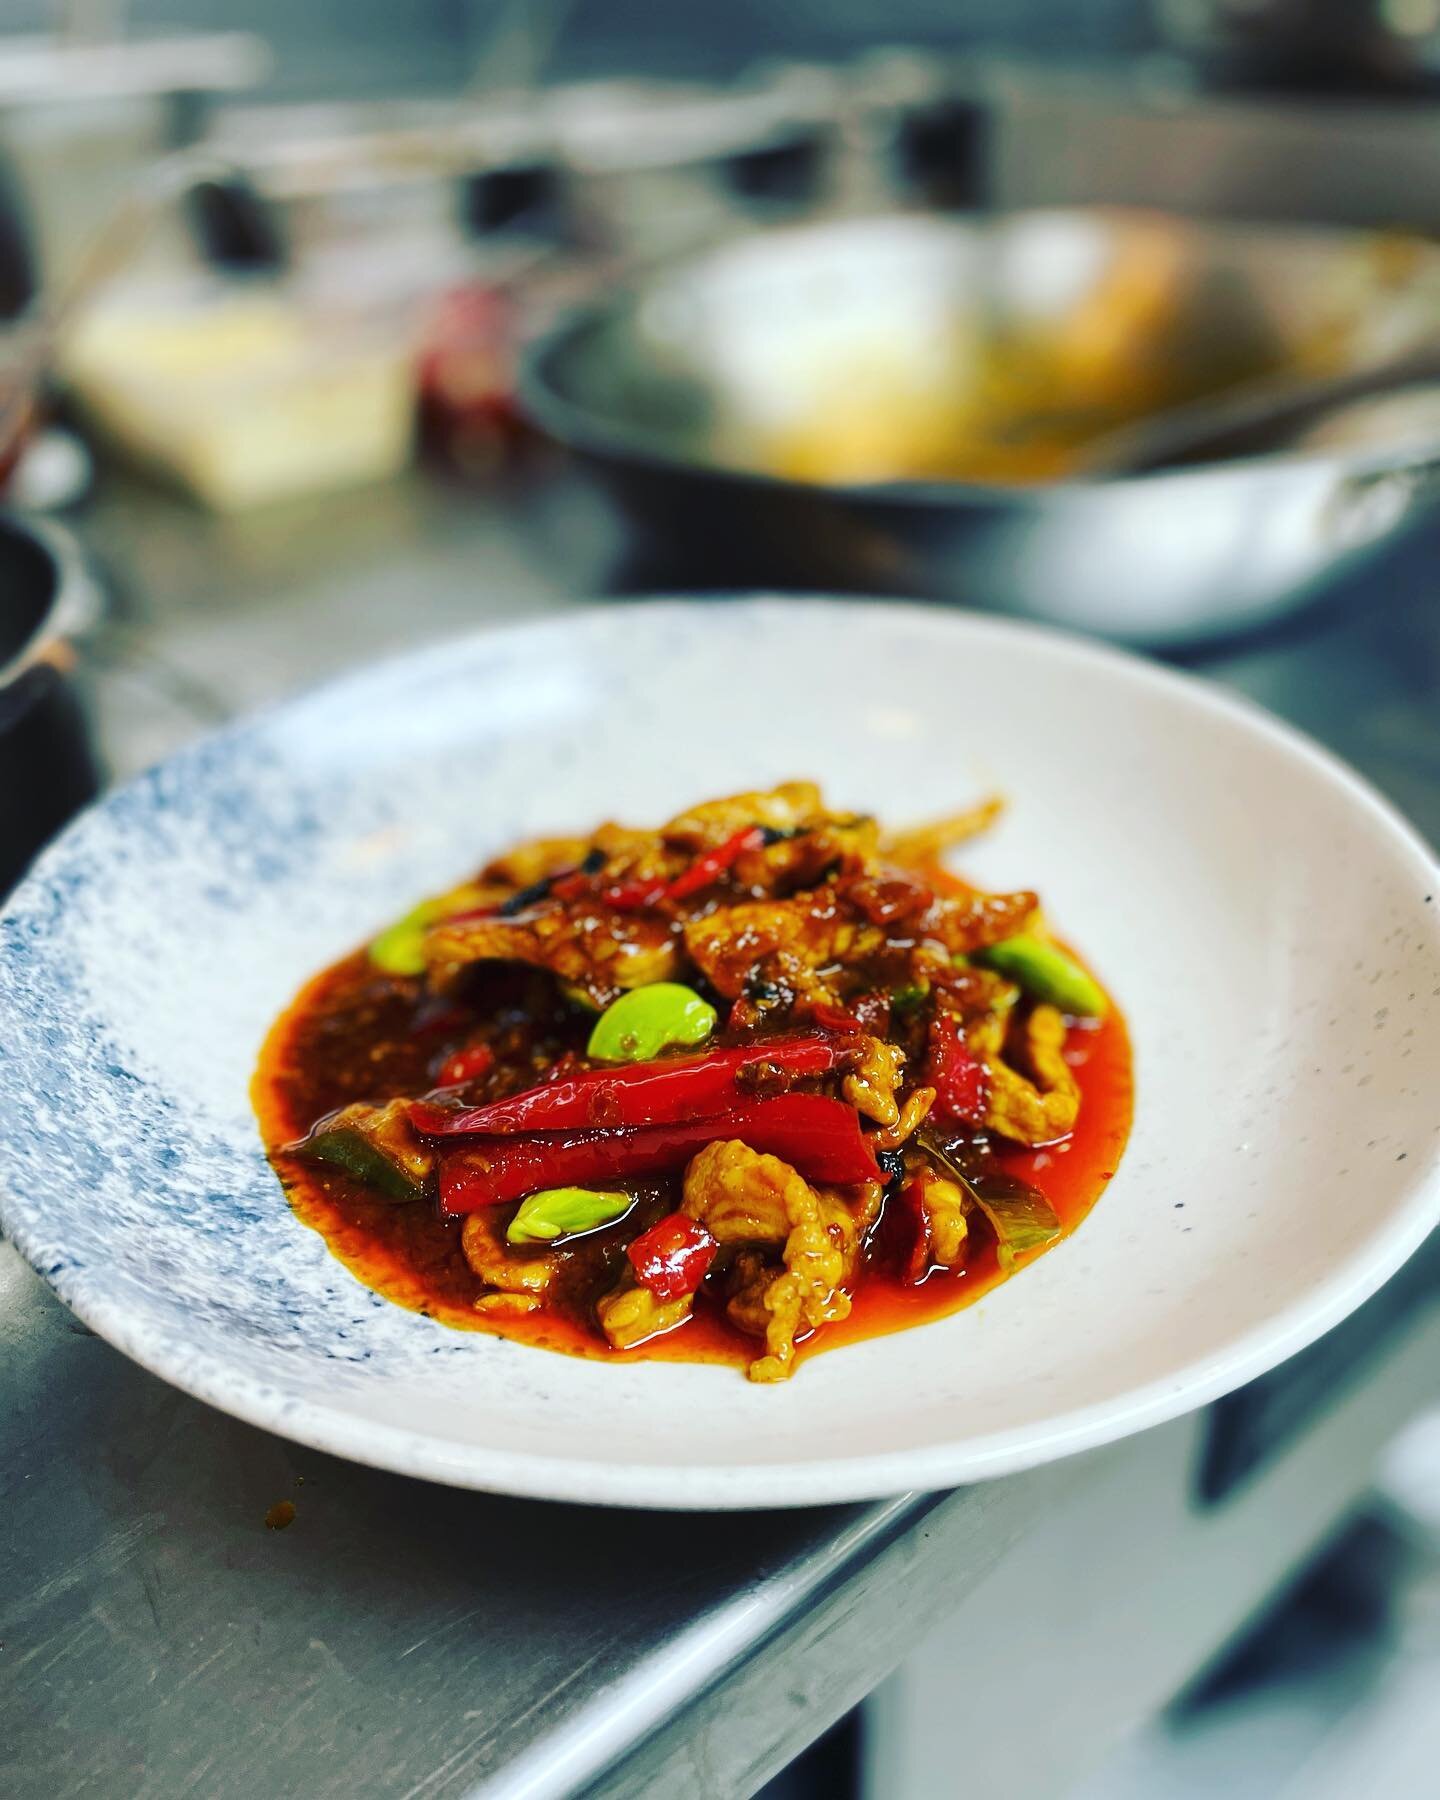 Pad Sa Tor Keaung Gang, another amazing unknown dish from southern Thailand. Stir fried sticky bean with our home made southern Thai red curry paste, full of punch. Must try.